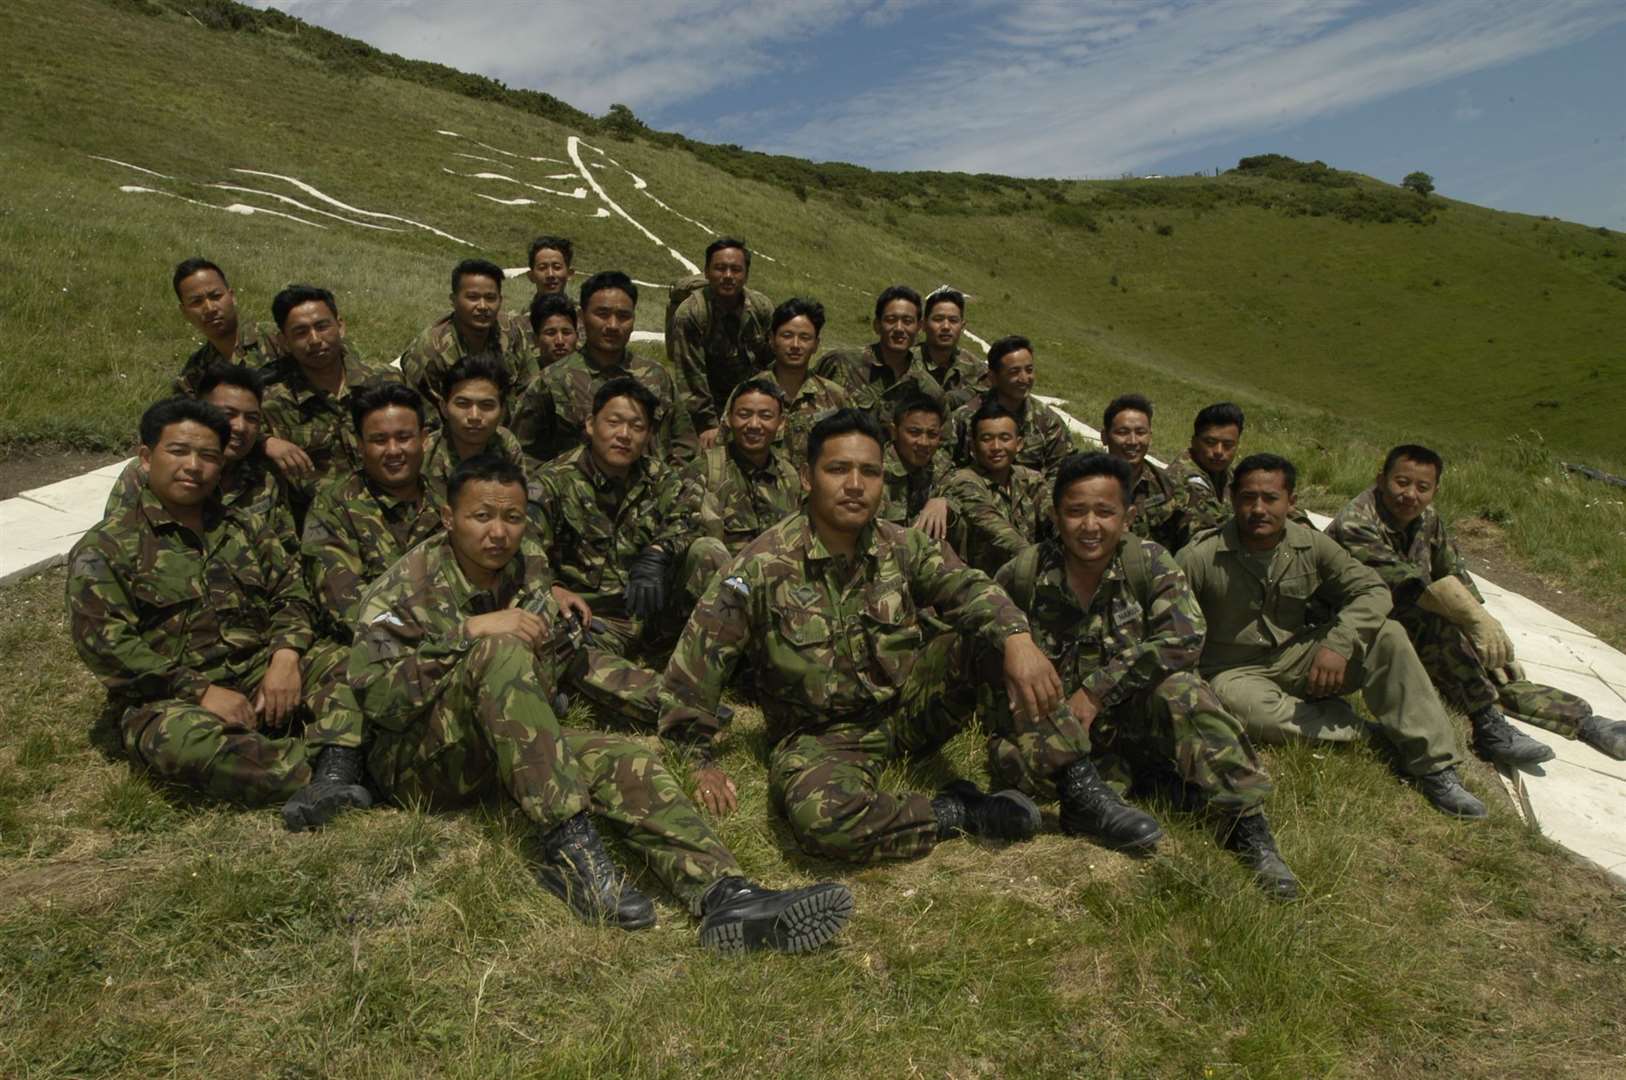 The Gurkha soldiers who helped build the landmark pictured in June 2003